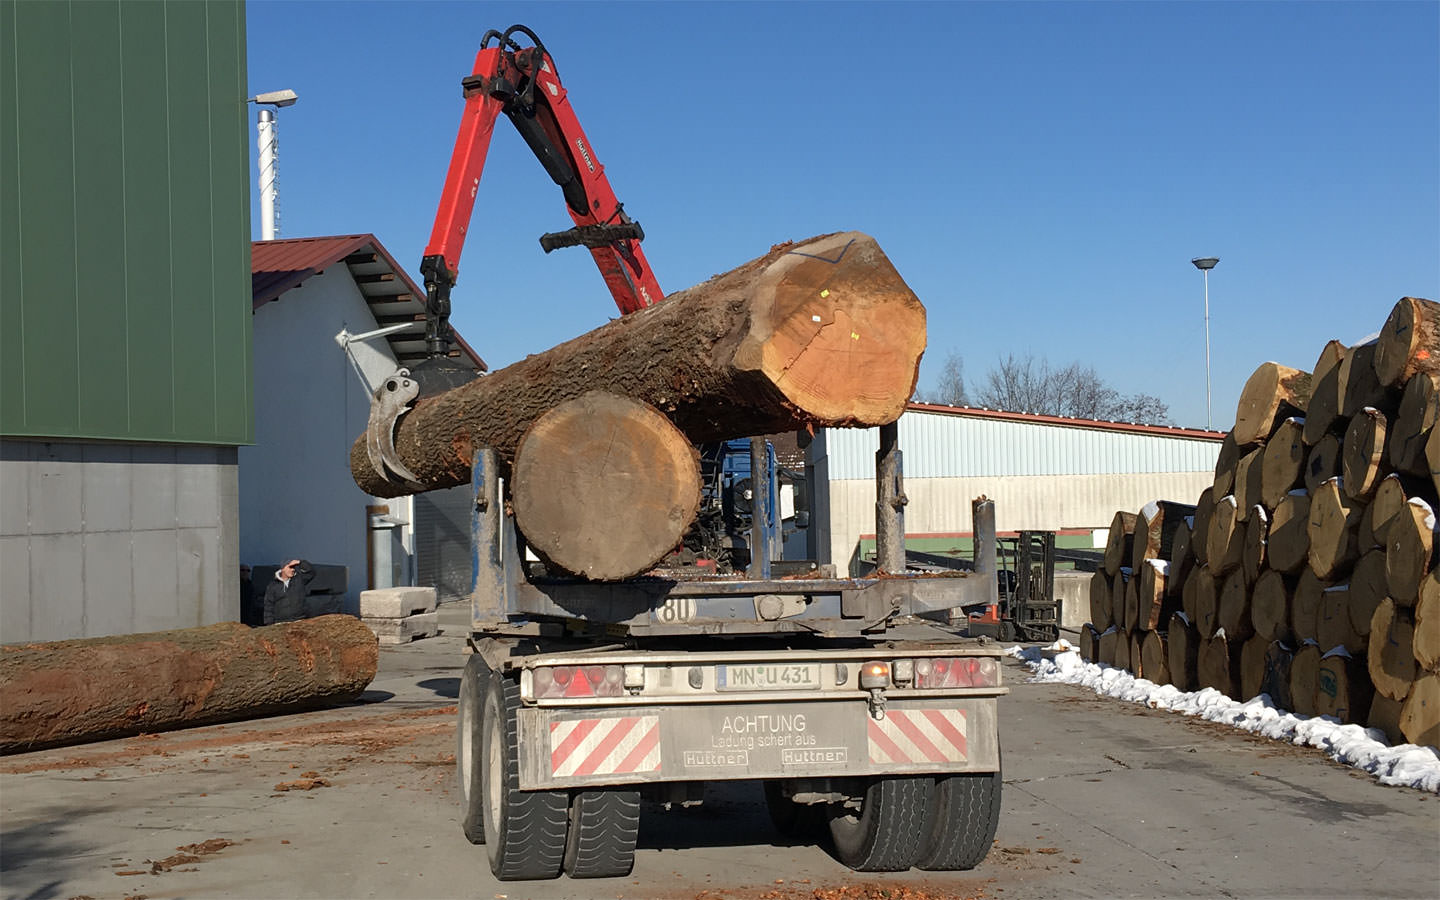 Unloading of a wood giant 